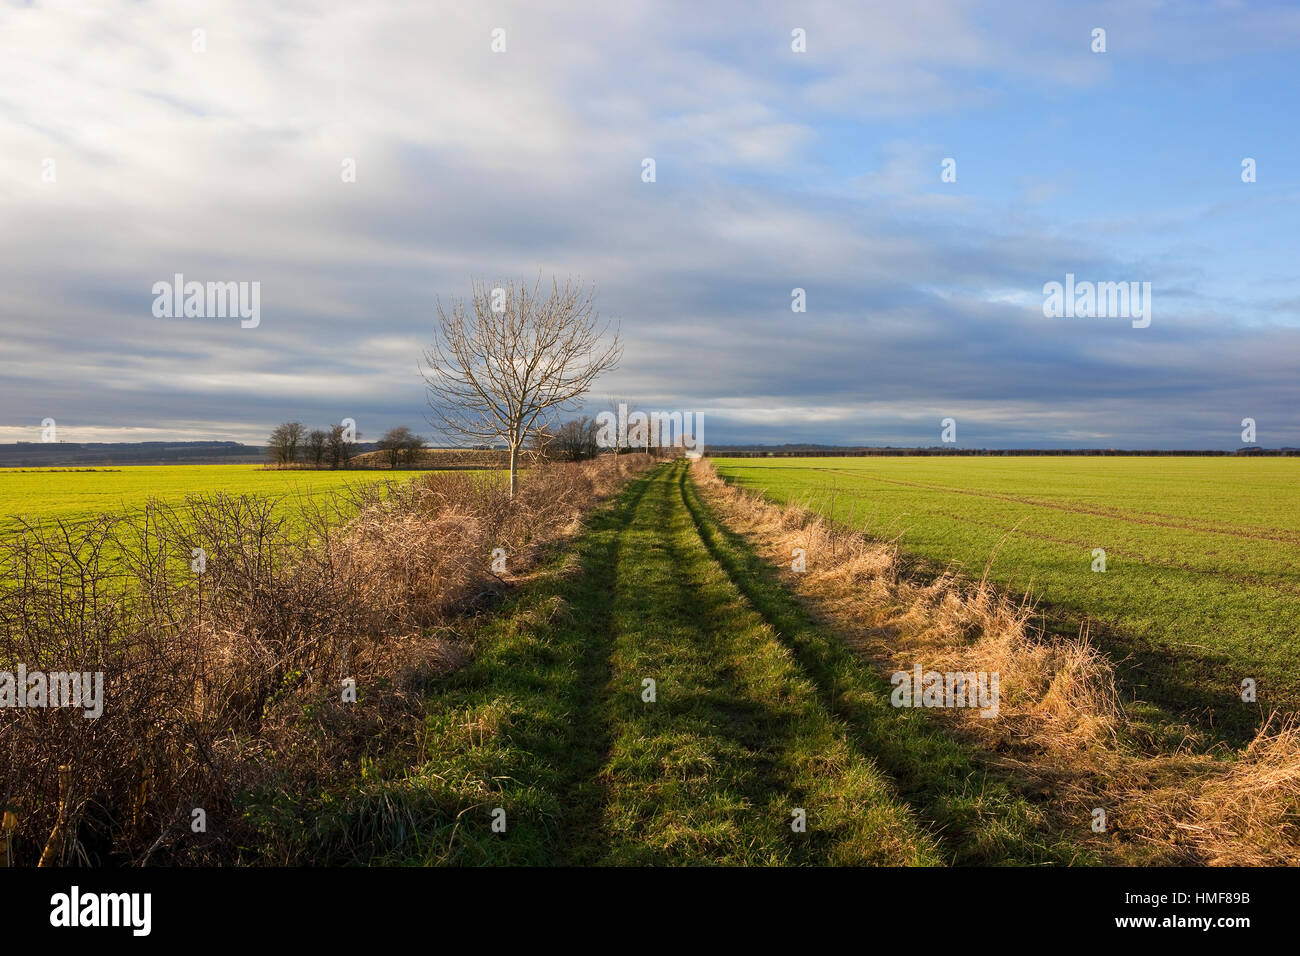 A grassy footpath between green arable fields with hedgerows and an Ash tree under a cloudy blue sky. Stock Photo